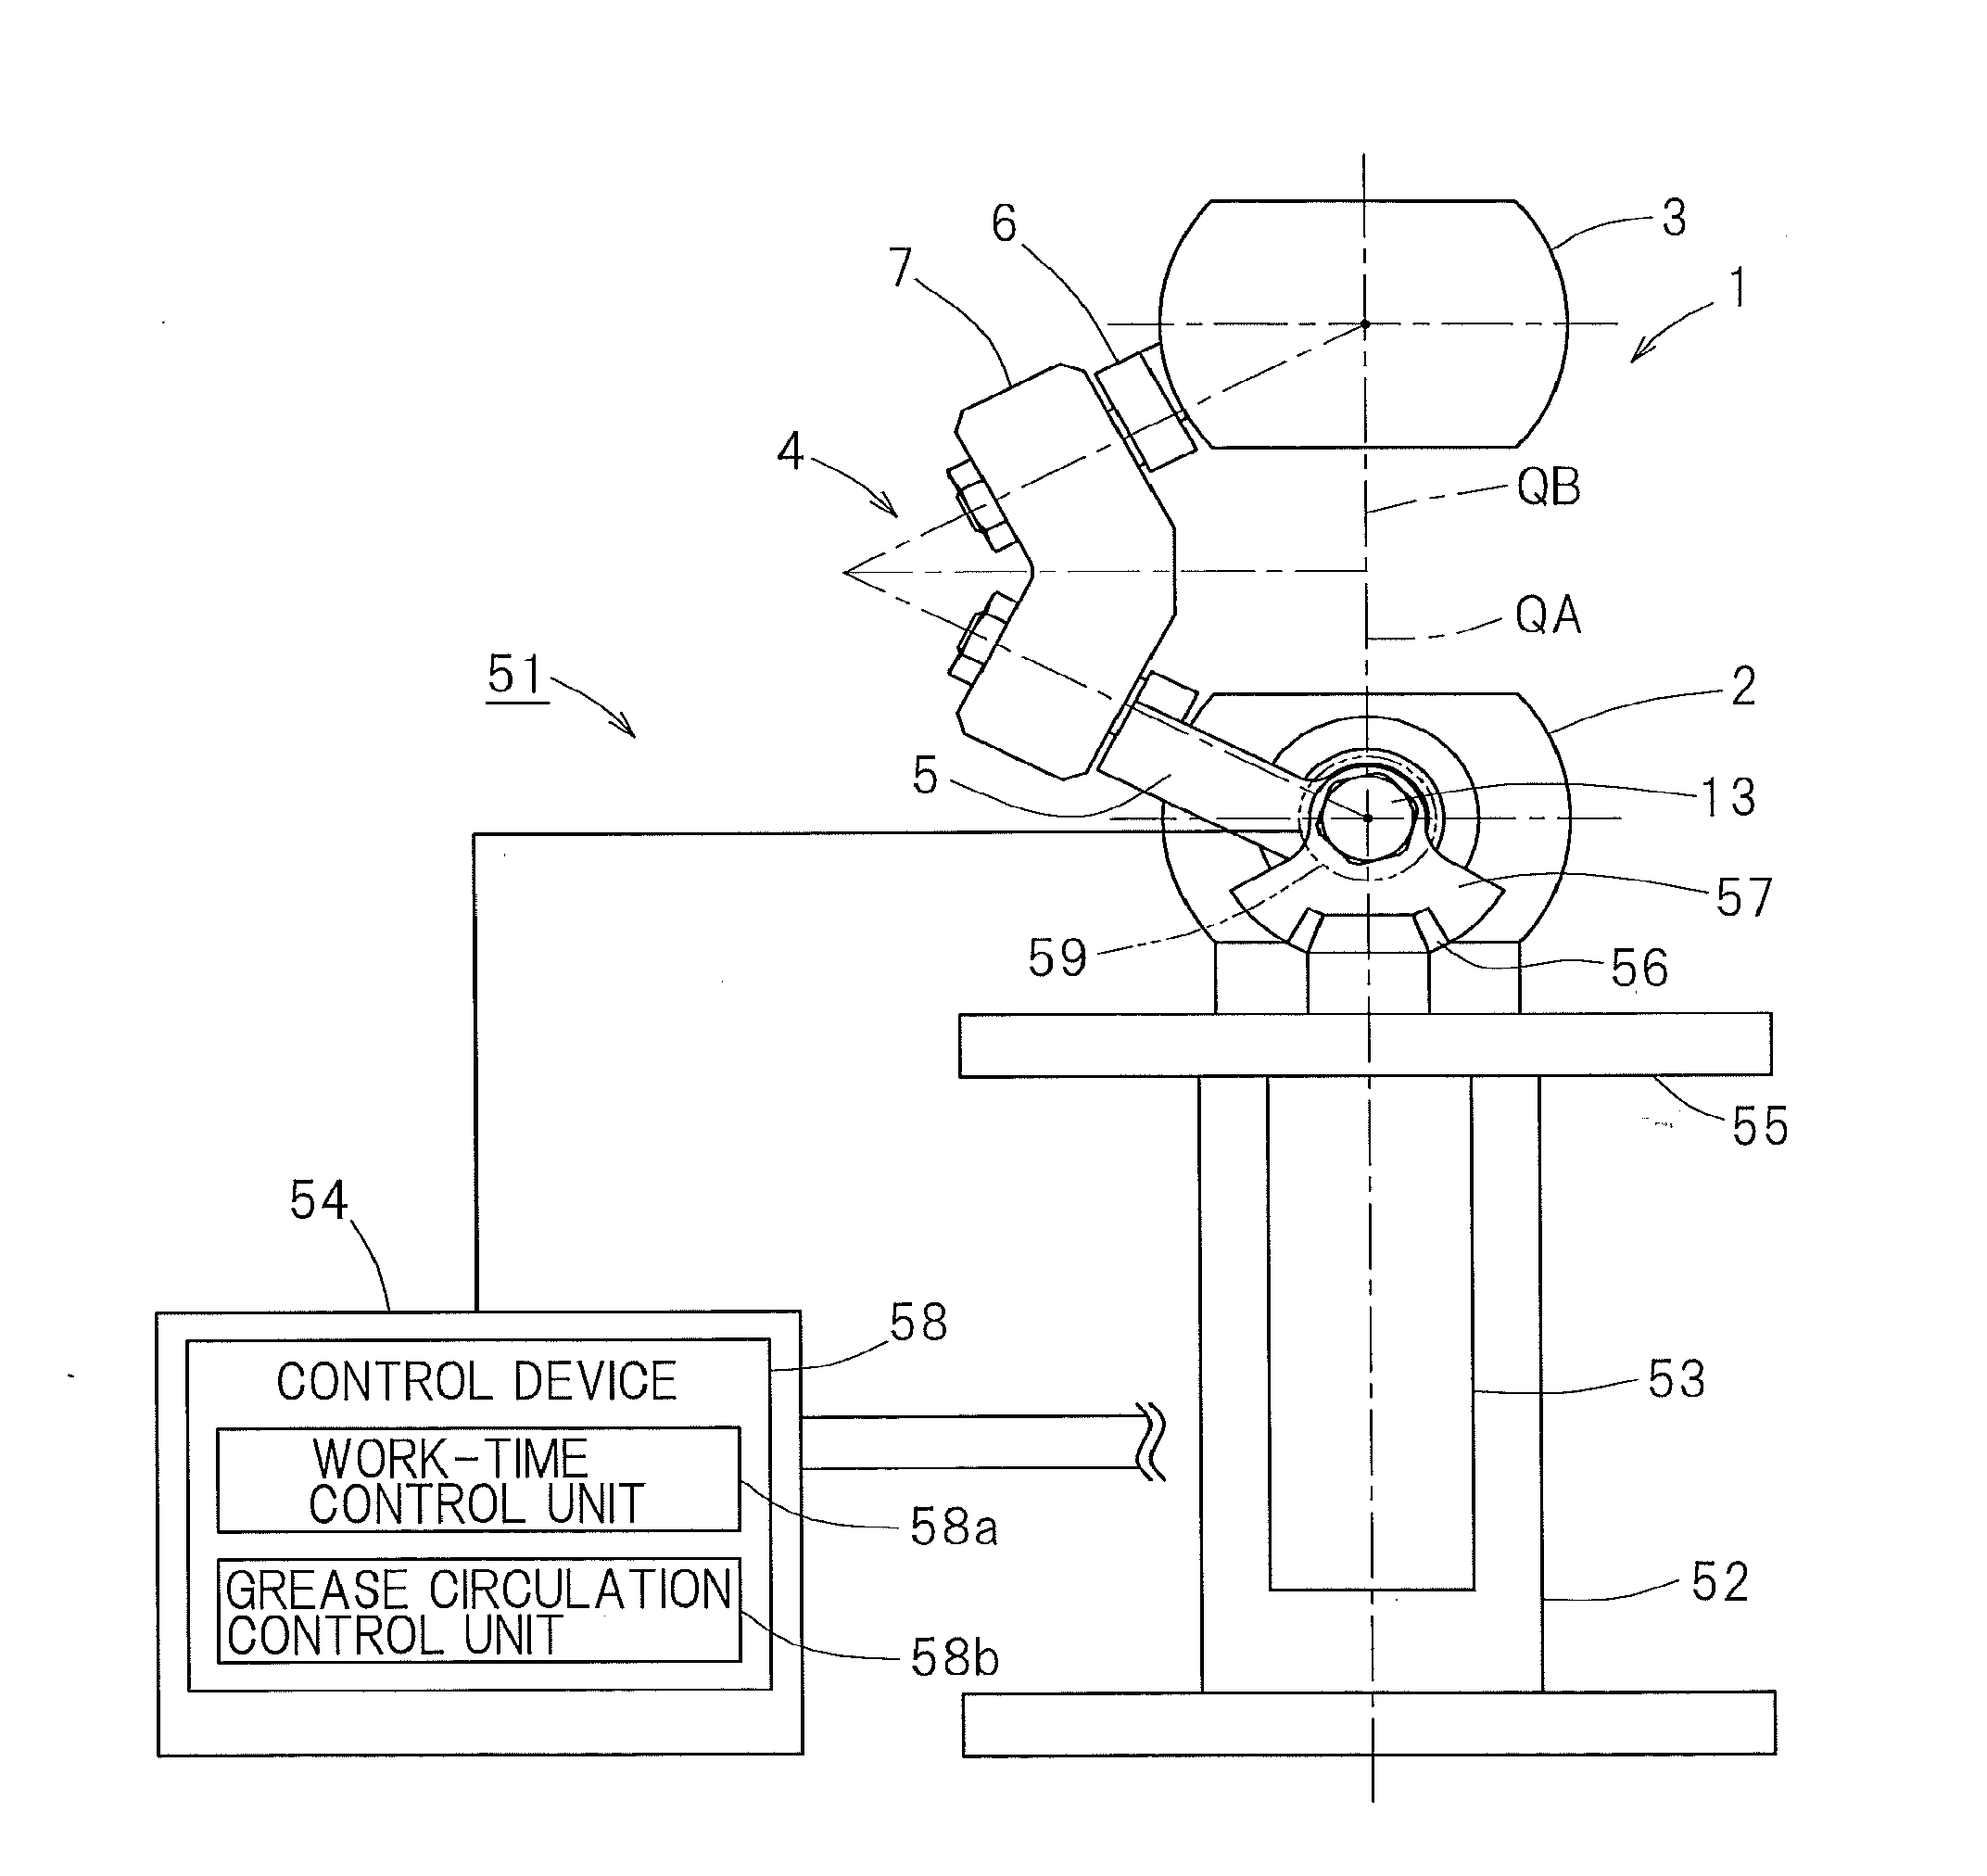 Link actuating device